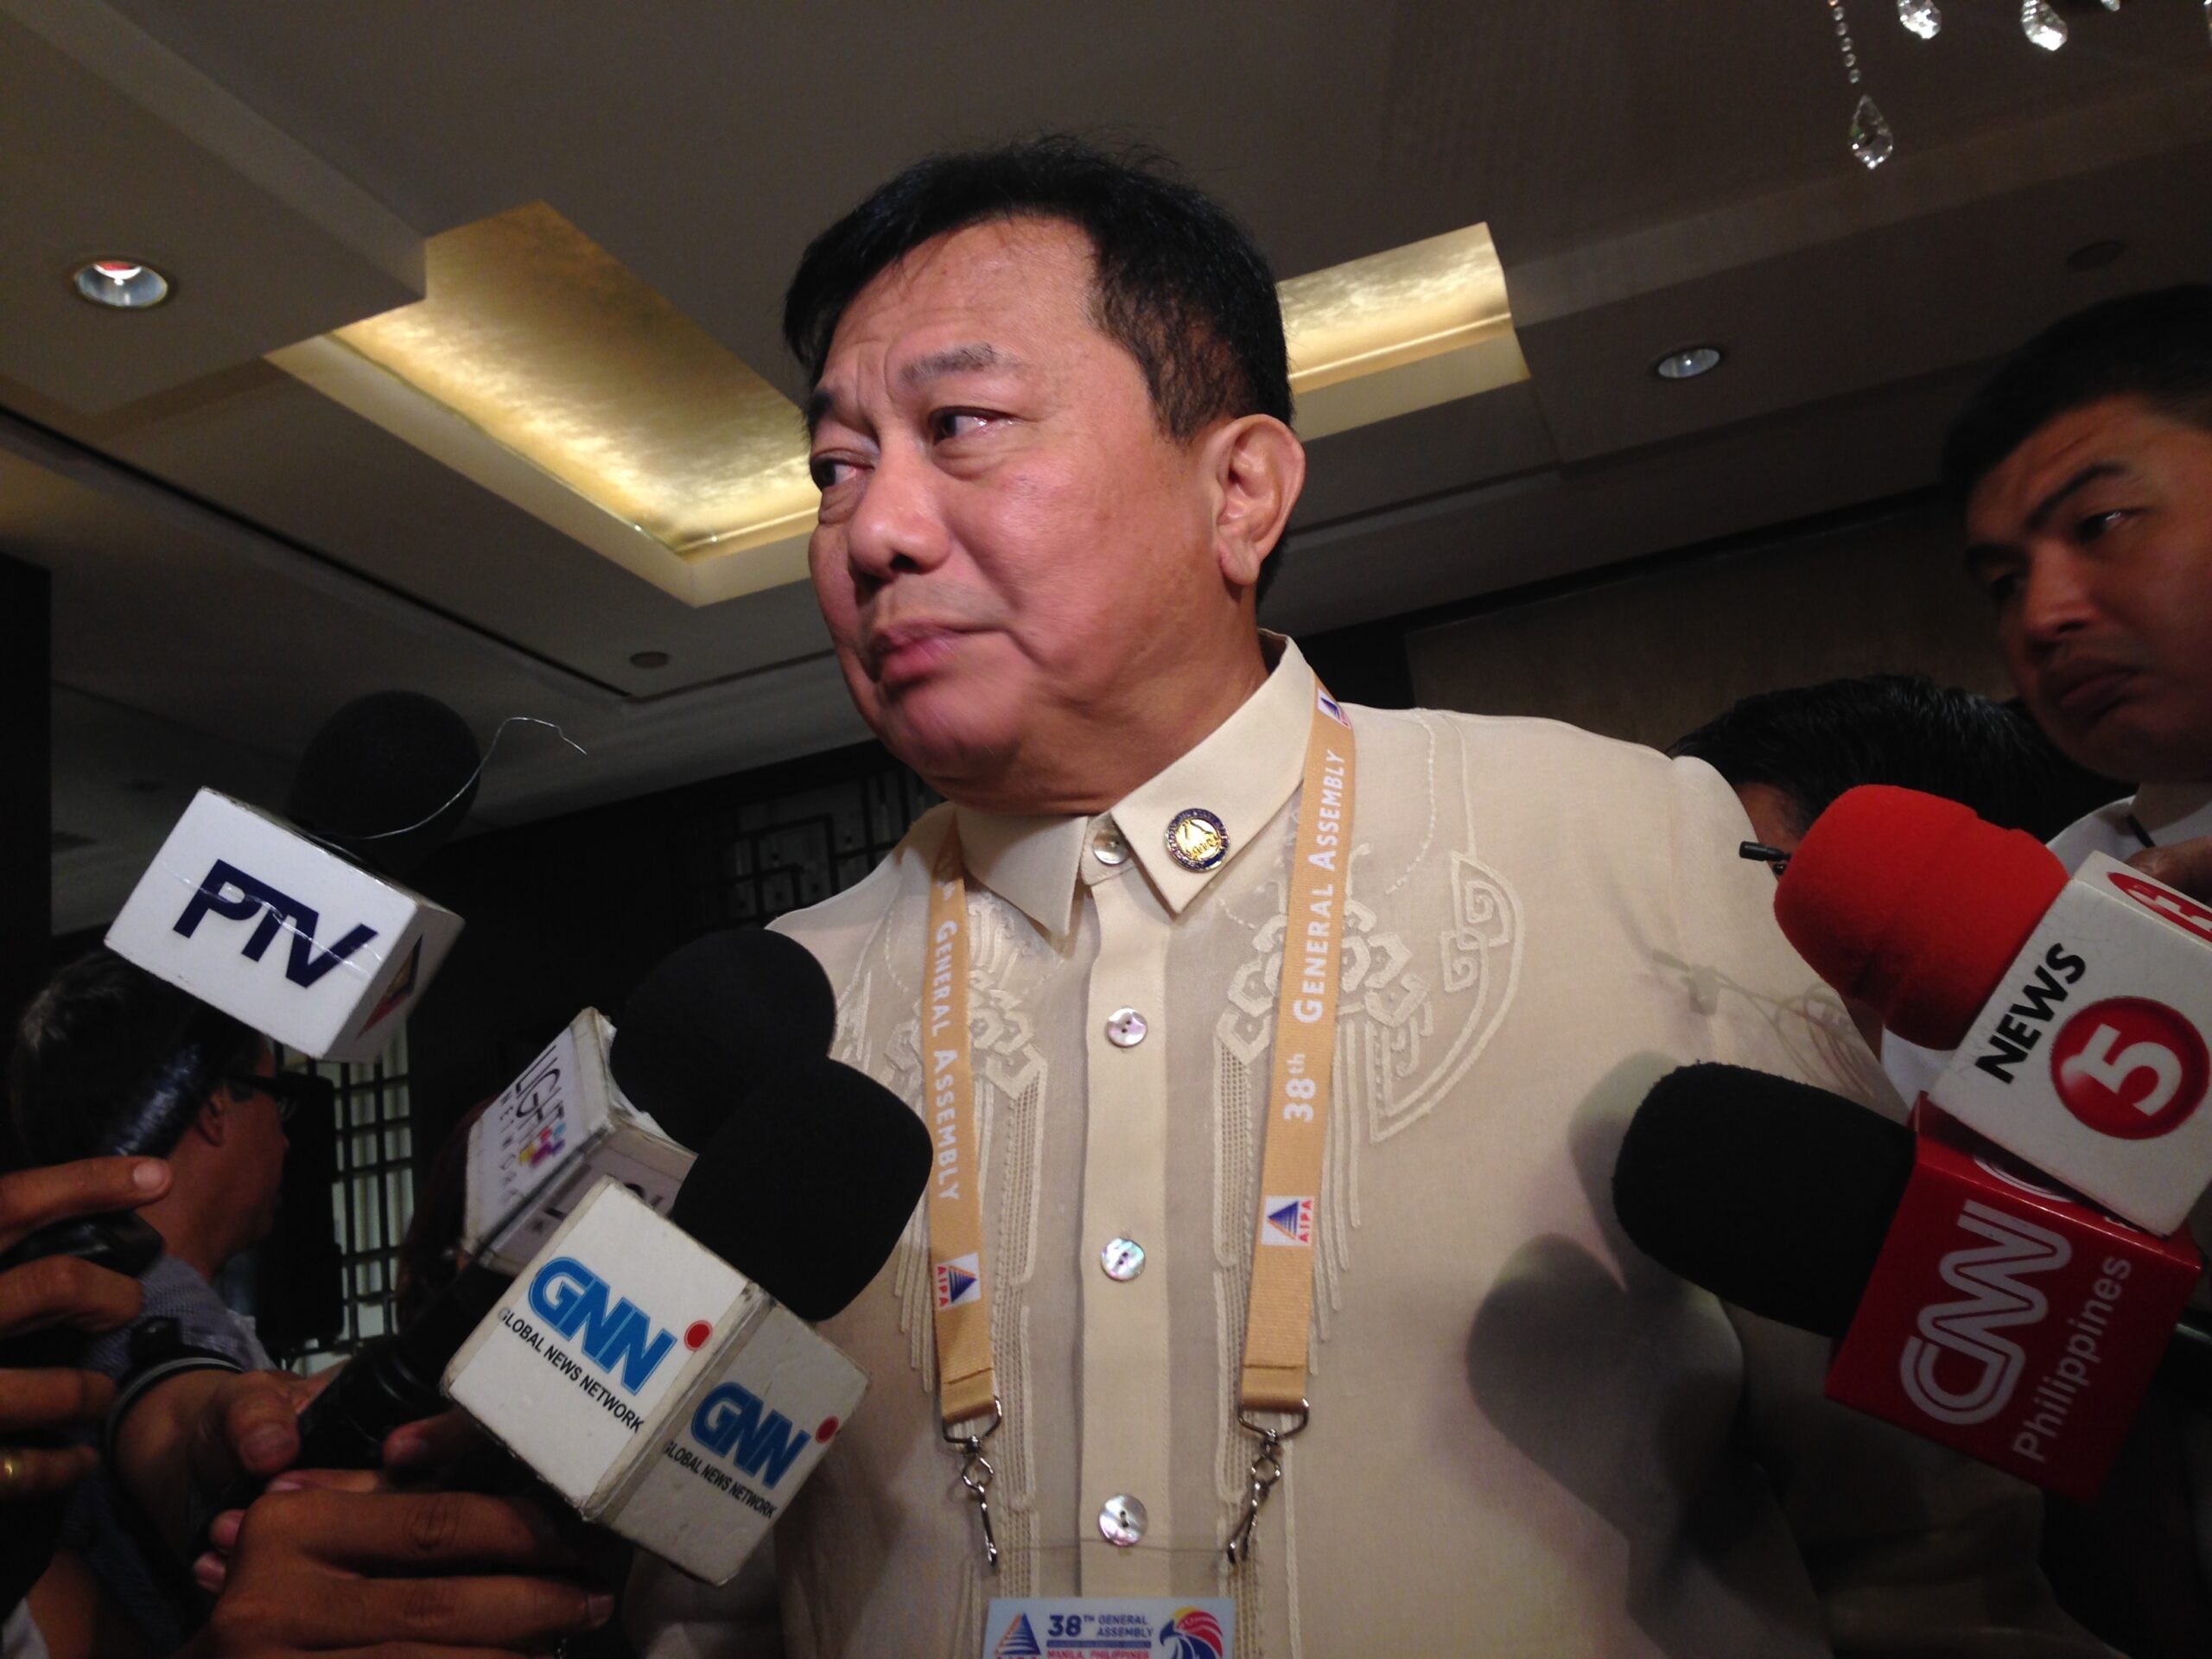 We aren’t being selective, says Alvarez on budget cuts